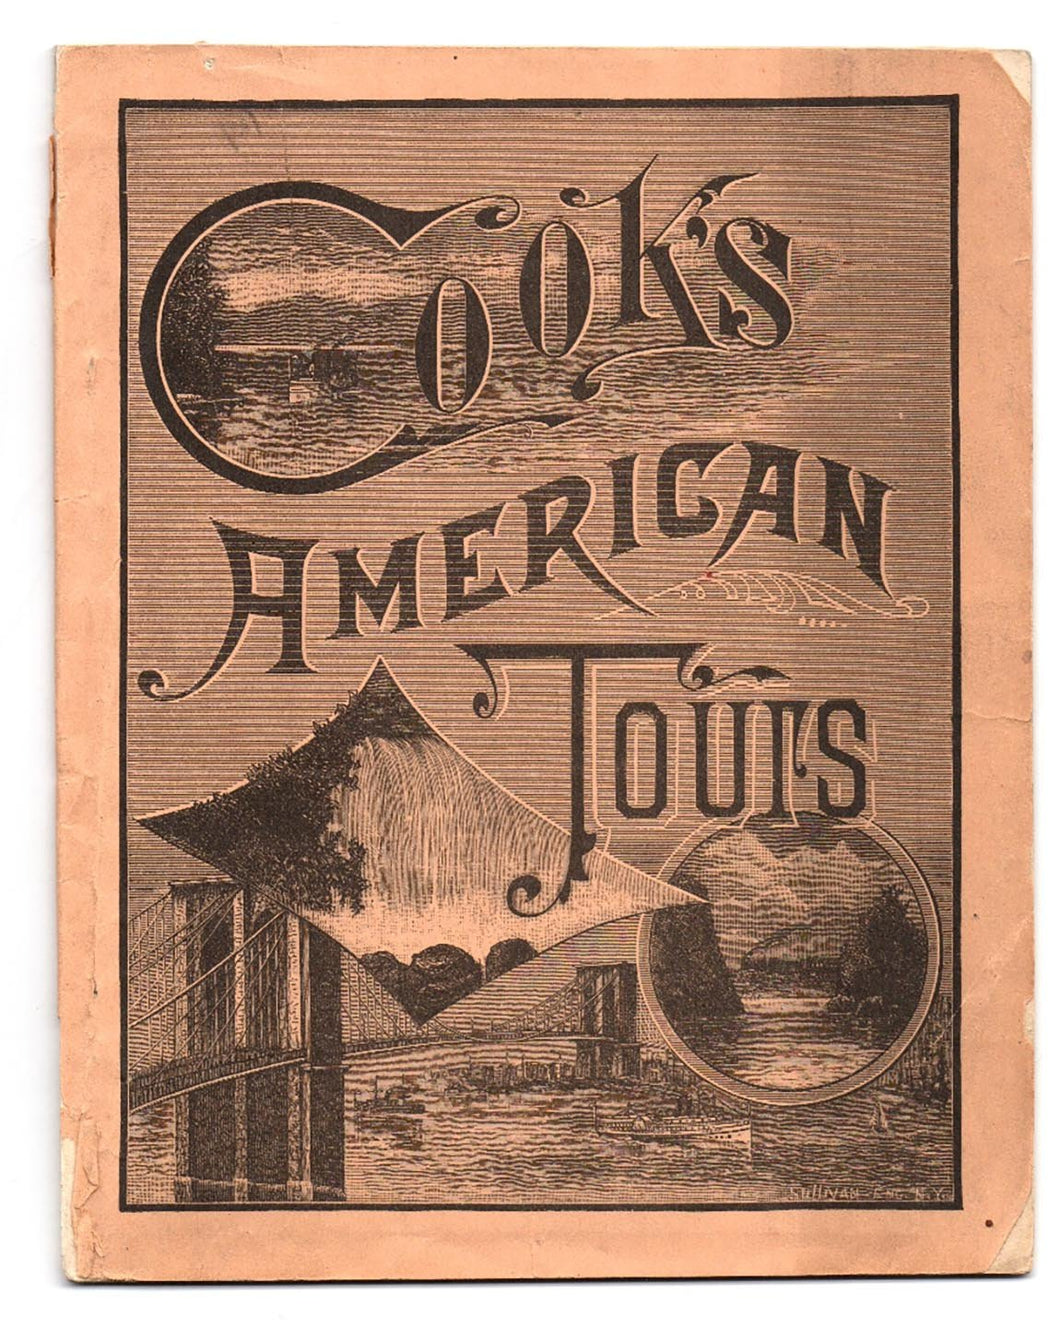 Cook's American Summer Tours, Season of 1886